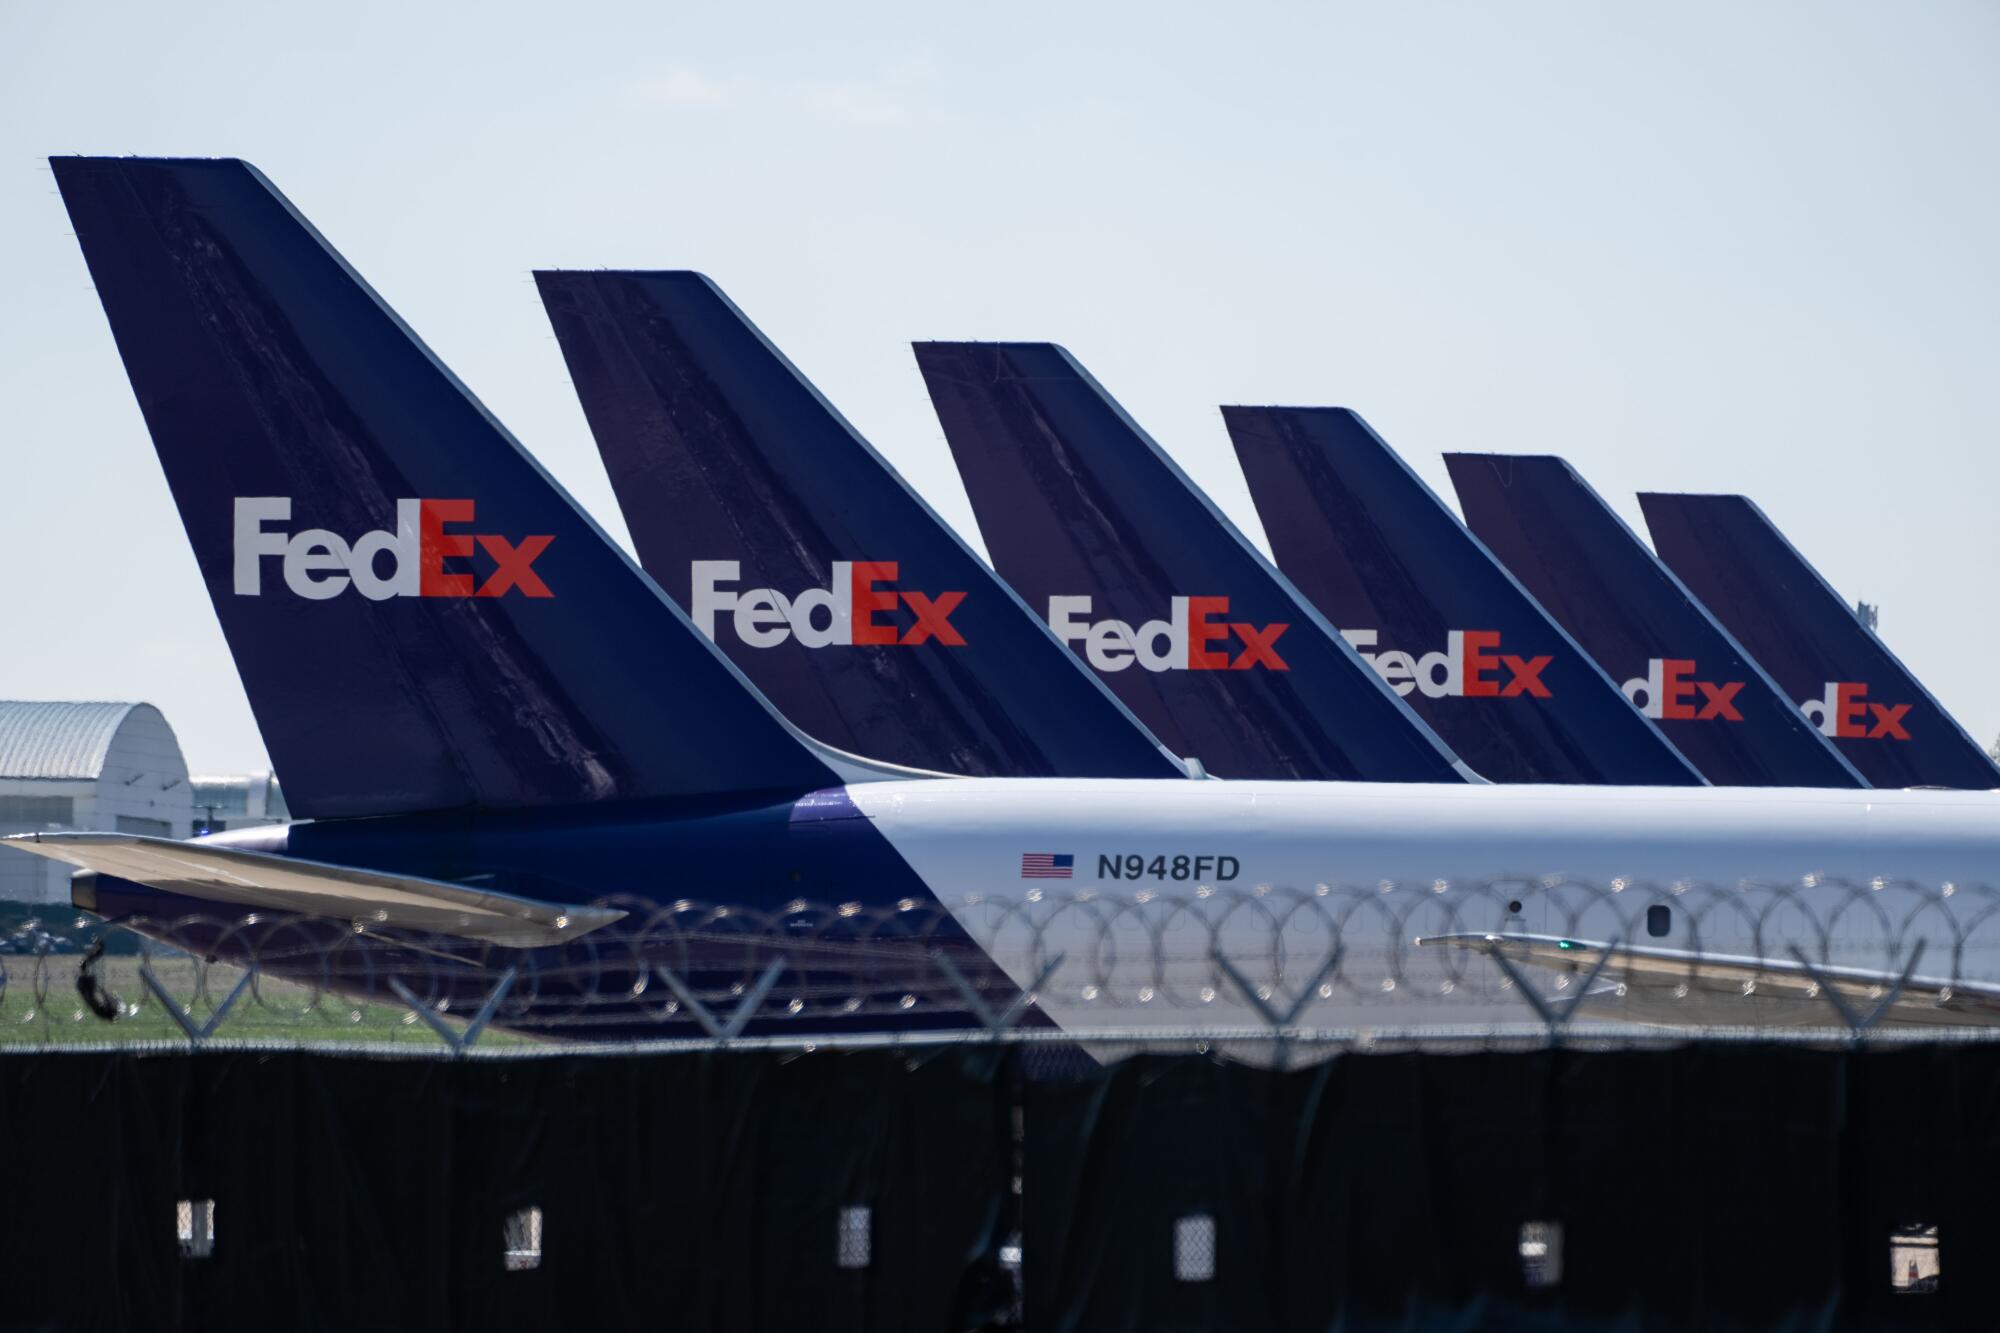 A row of planes with the FedEx logo.